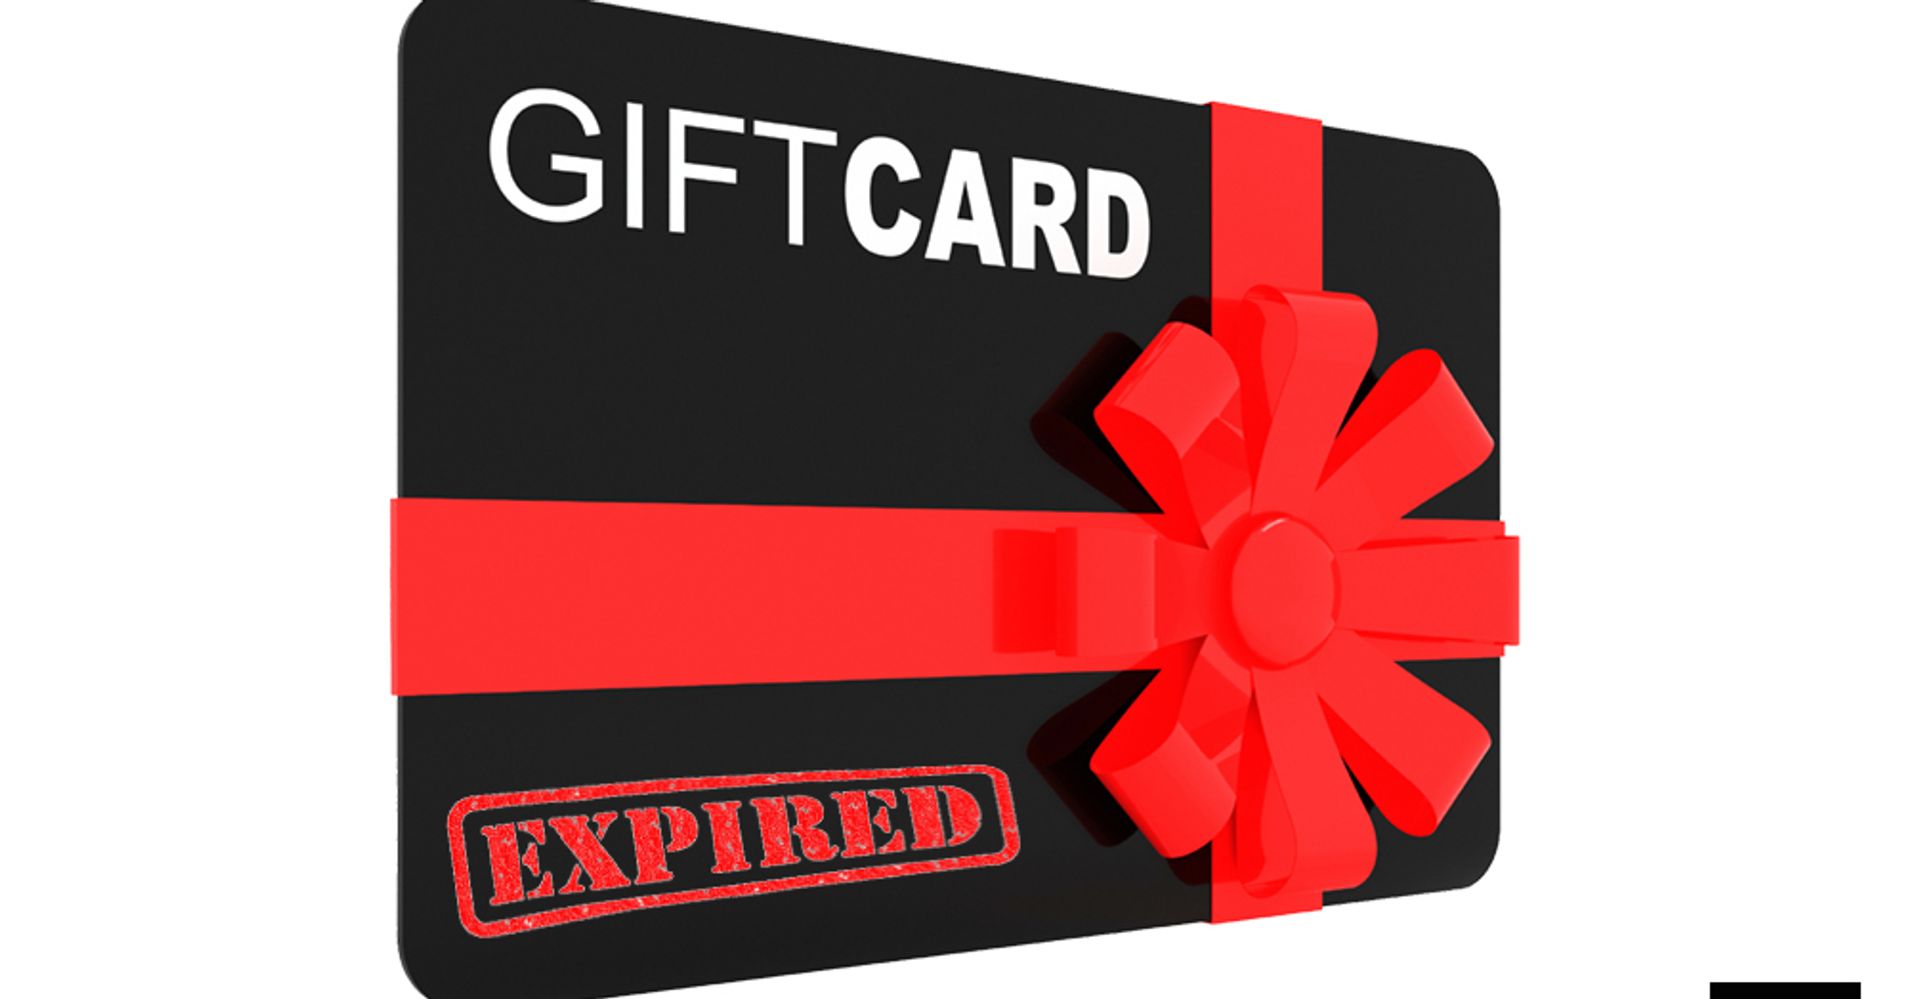 If My Gift Cards Don't Expire, Why Are They Expiring